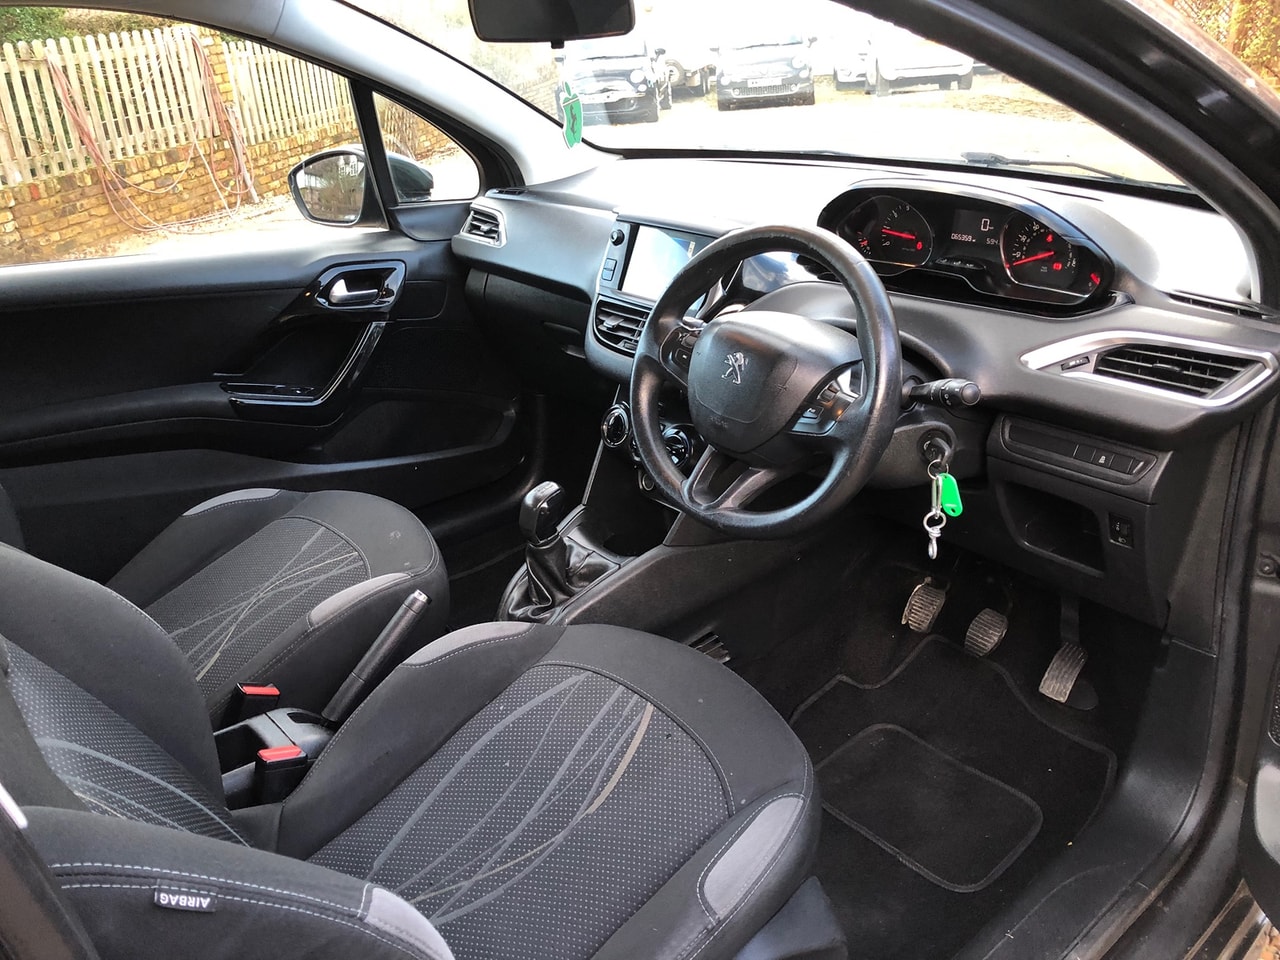 2013 PEUGEOT 208 Active 1.2 VTi 82 - Picture 10 of 13